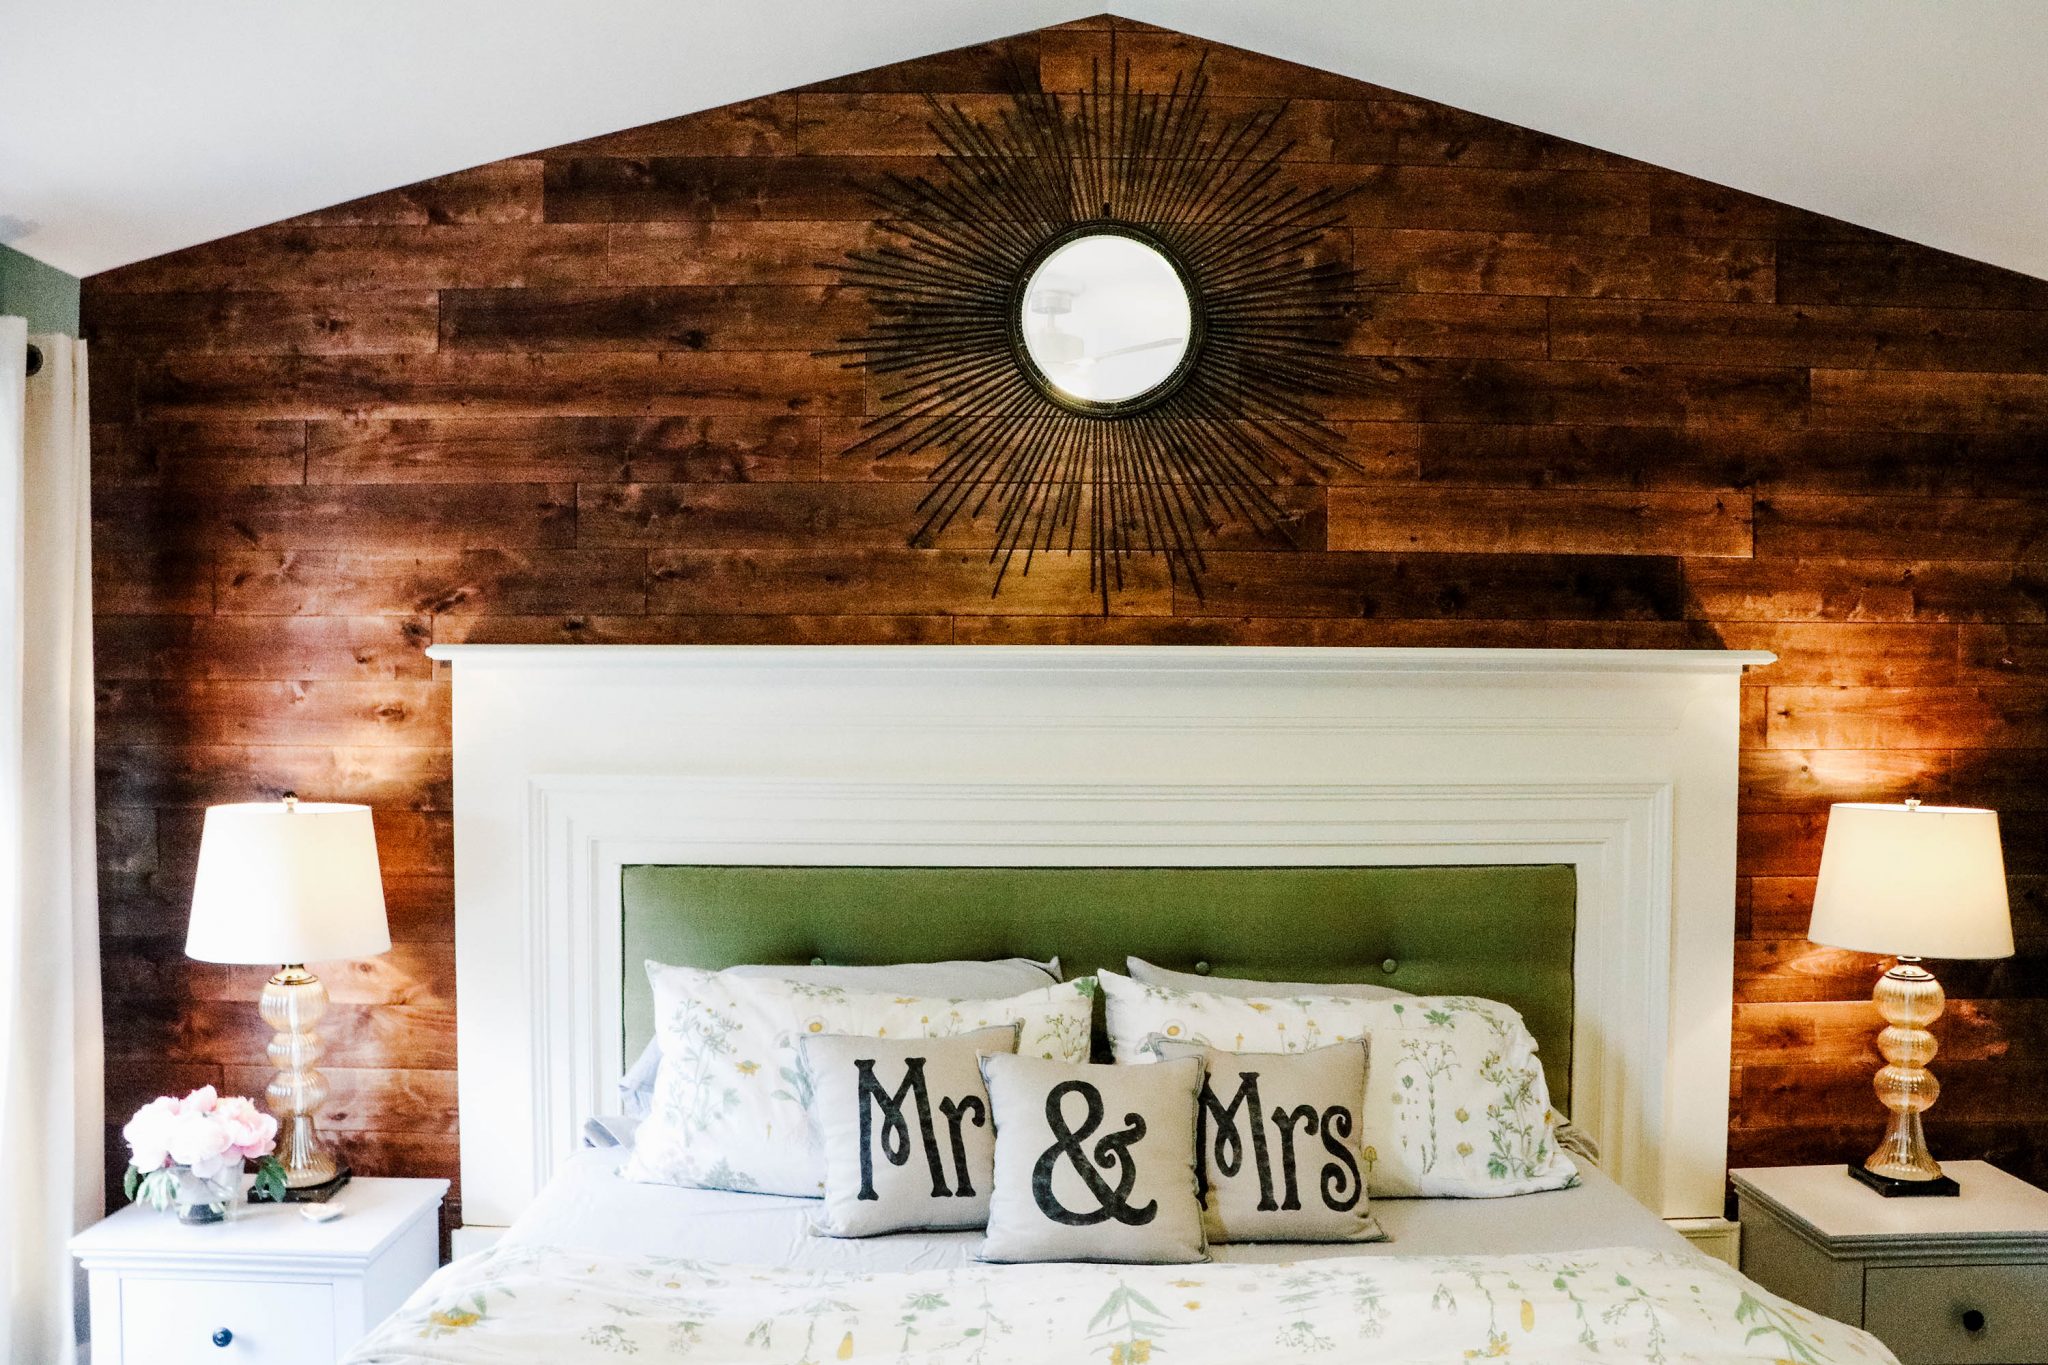 Master Bedroom Retreat with Wood-Planked Accent Wall and Tufted Mantel Headboard